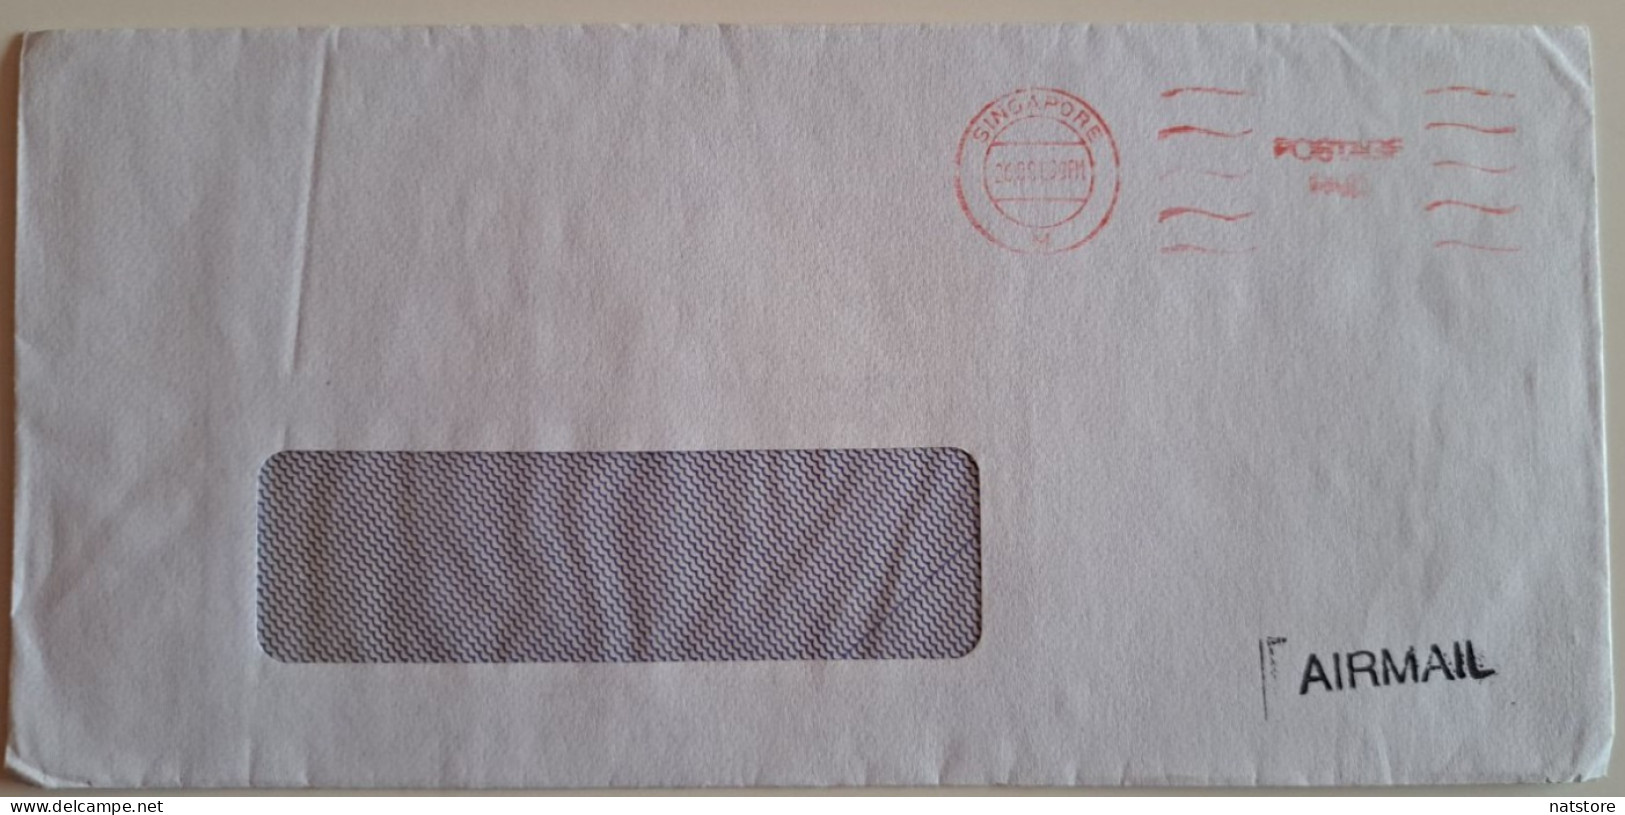 1999. SINGAPORE..COVER WITH MACHINE  STAMP..AIRMAIL - Singapore (1959-...)